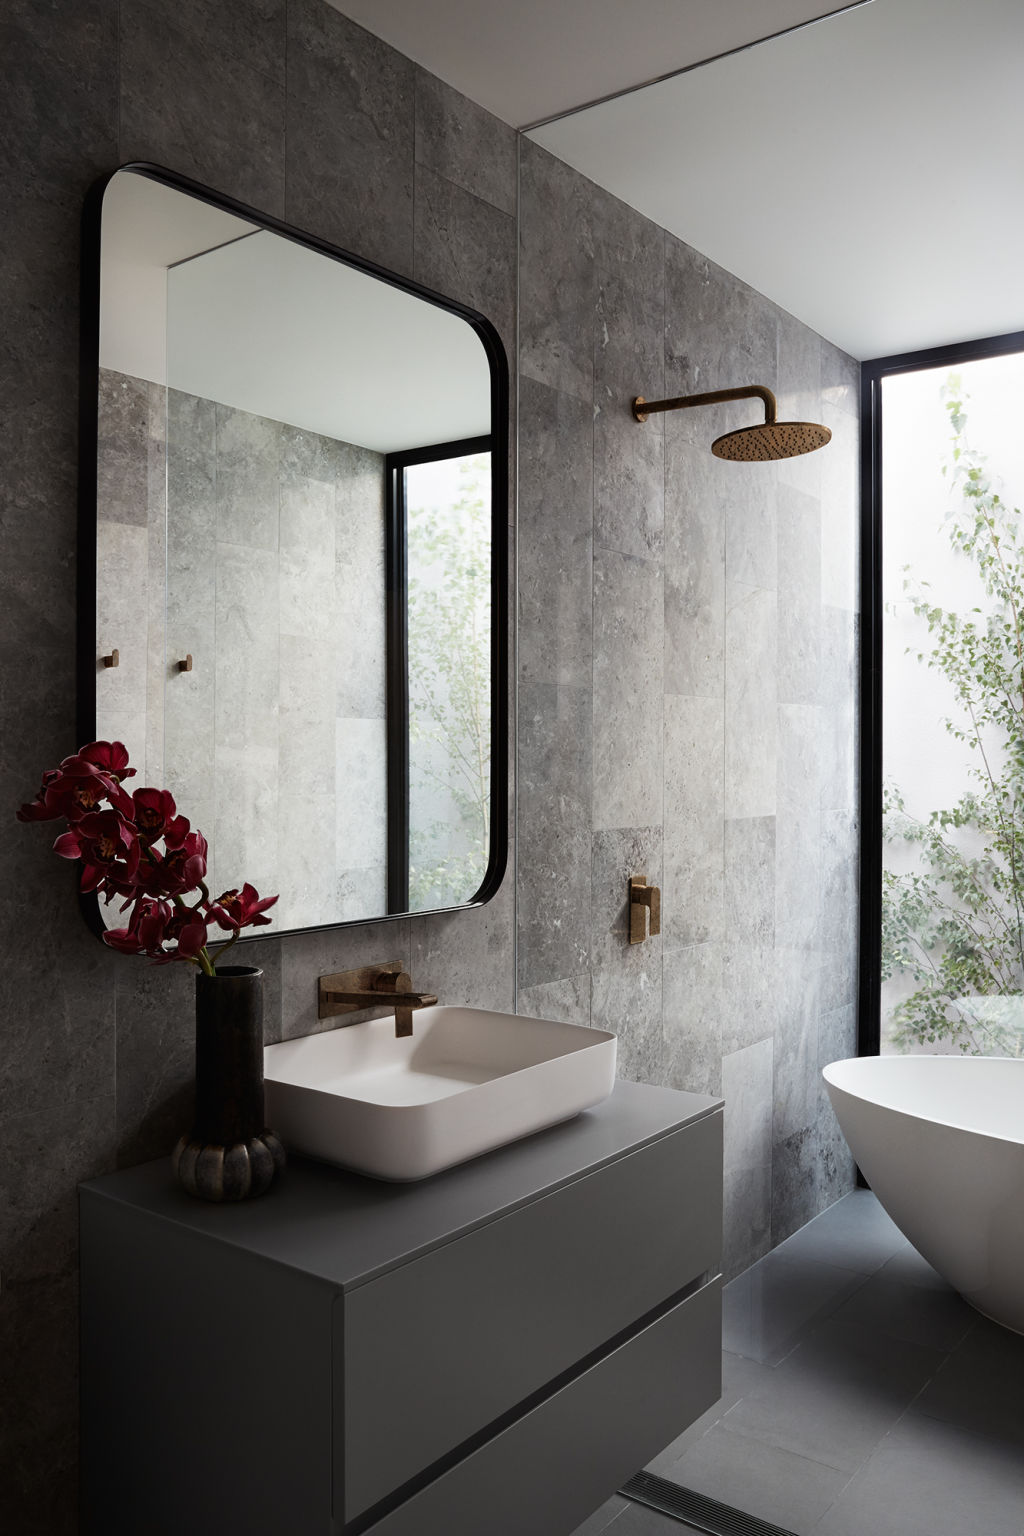 Brass tapware, grey tiling and a curved bath and wash basin feature in the elegant bathroom.  Photo: Fi Storey